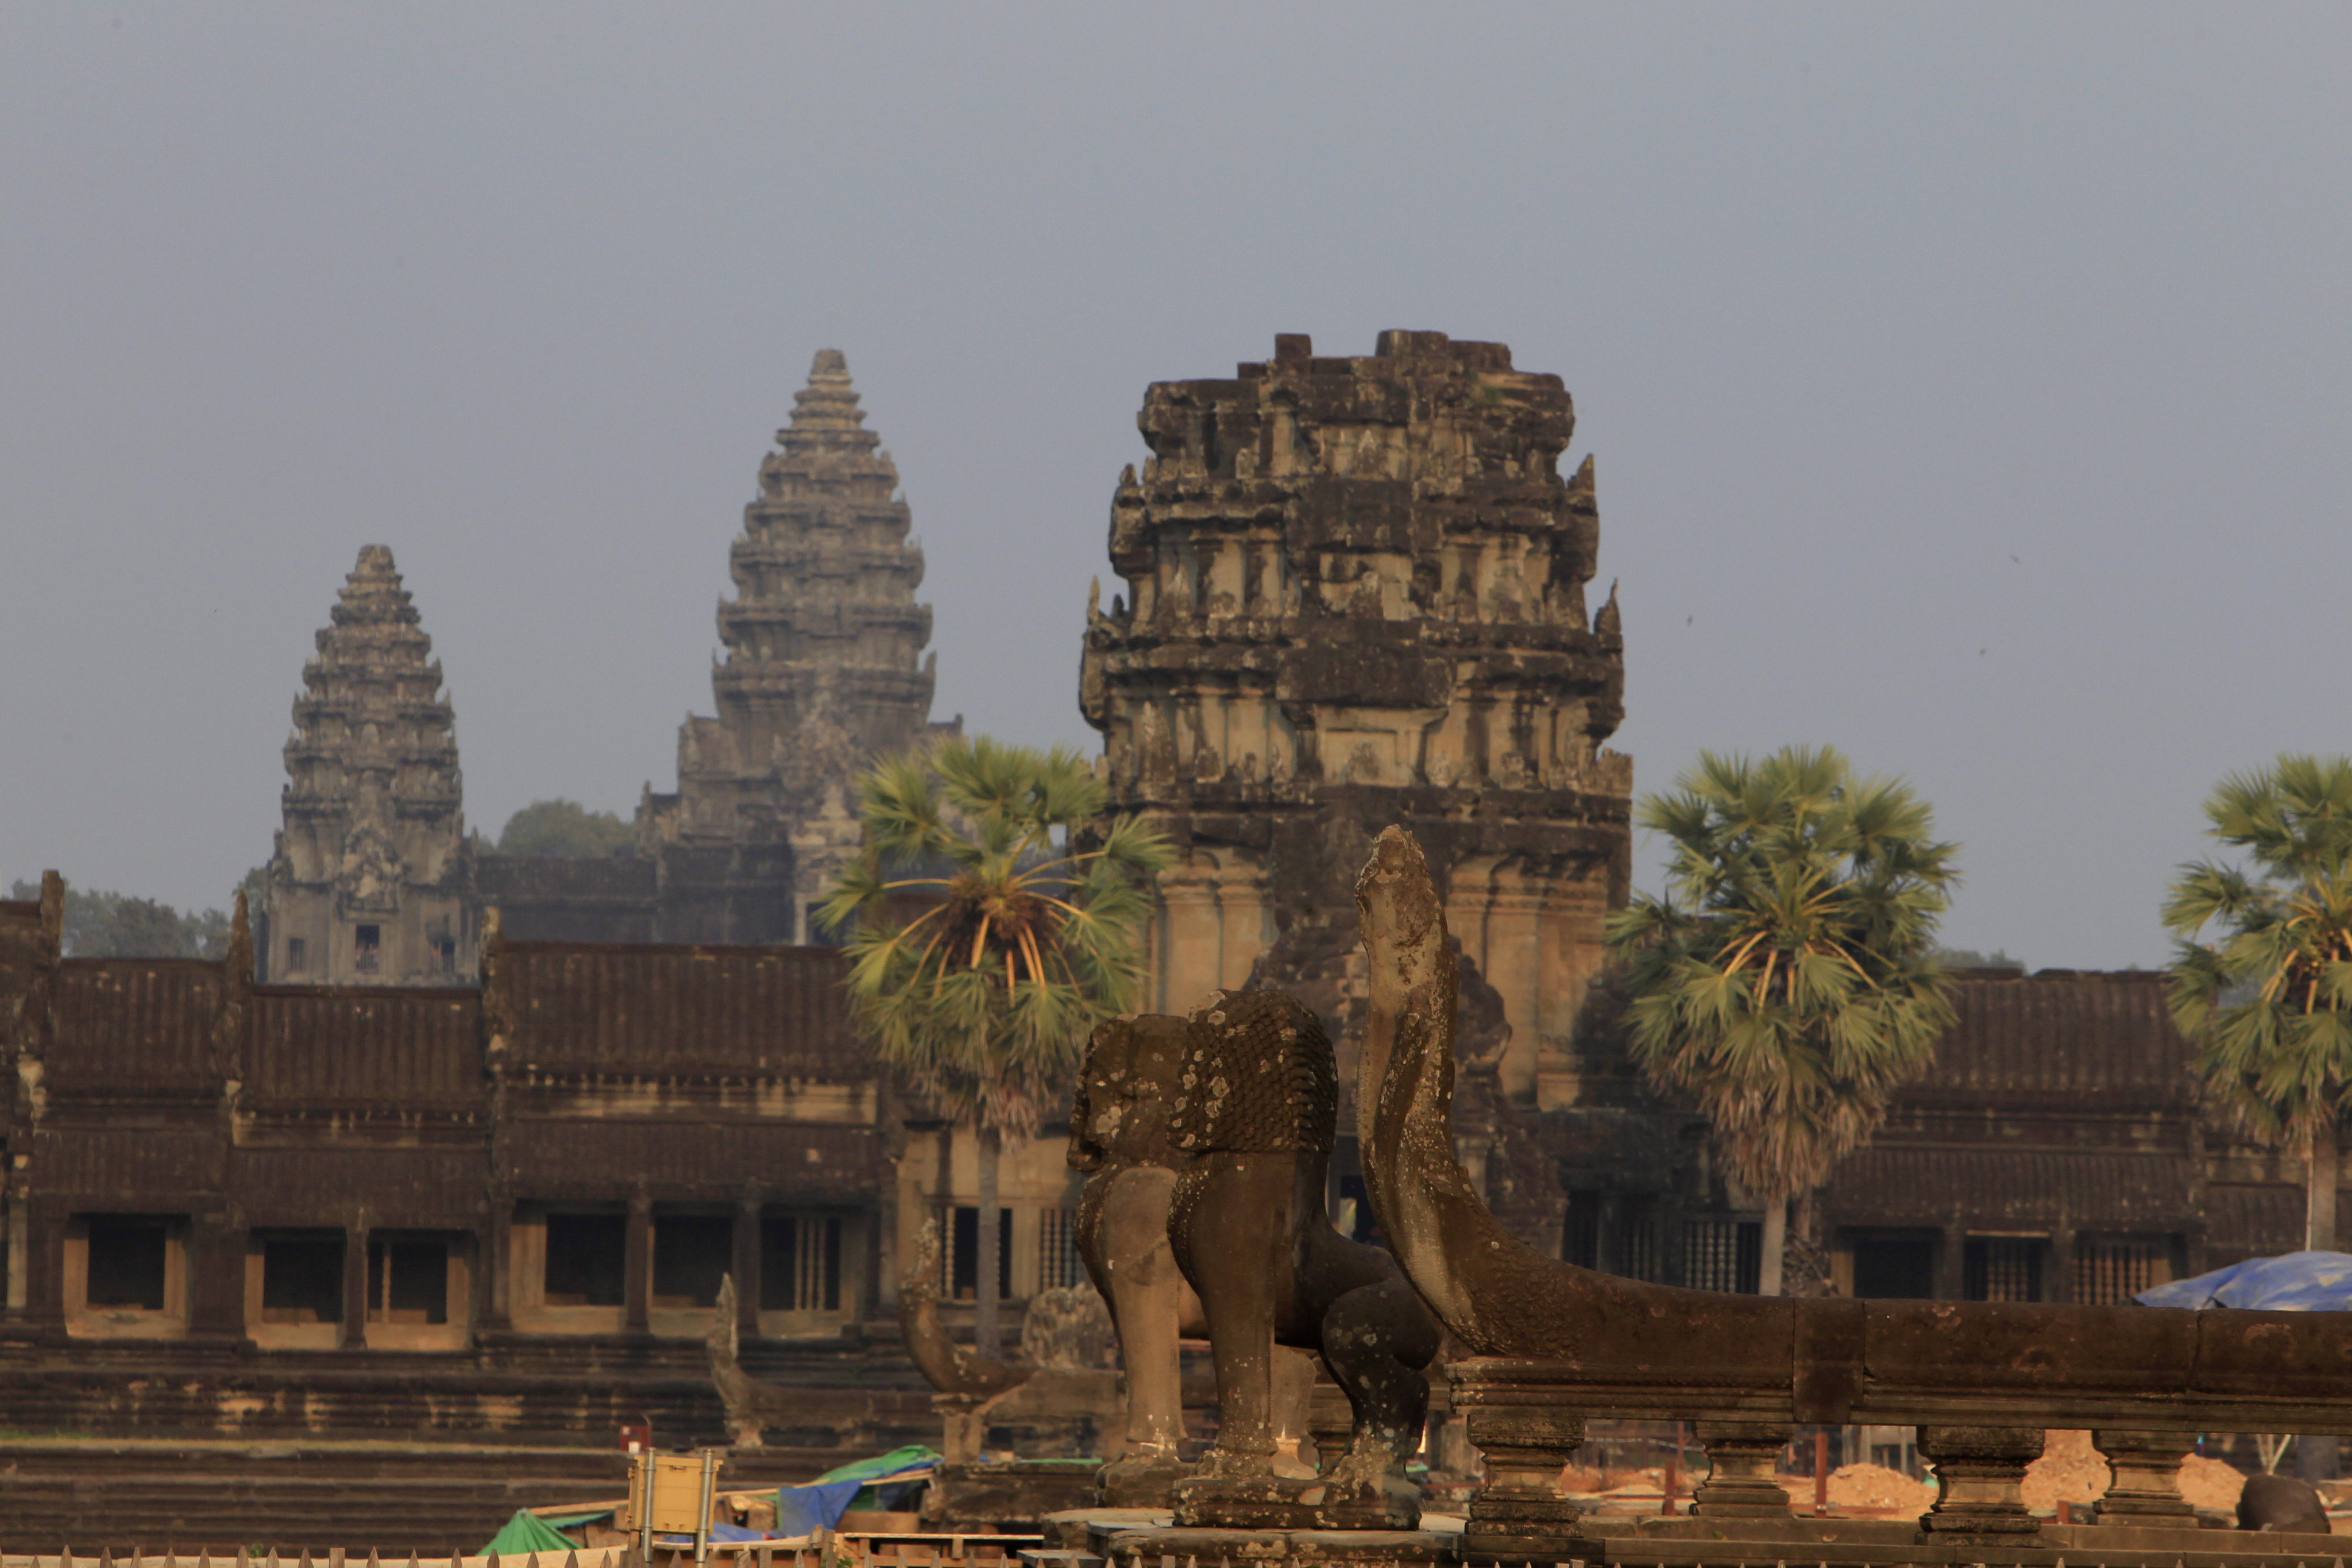 The ruins of the Angkor Wat temple in Cambodia, where authorities have rejected allegations they forcibly evicted people living around the Angkor complex. Photo: AP